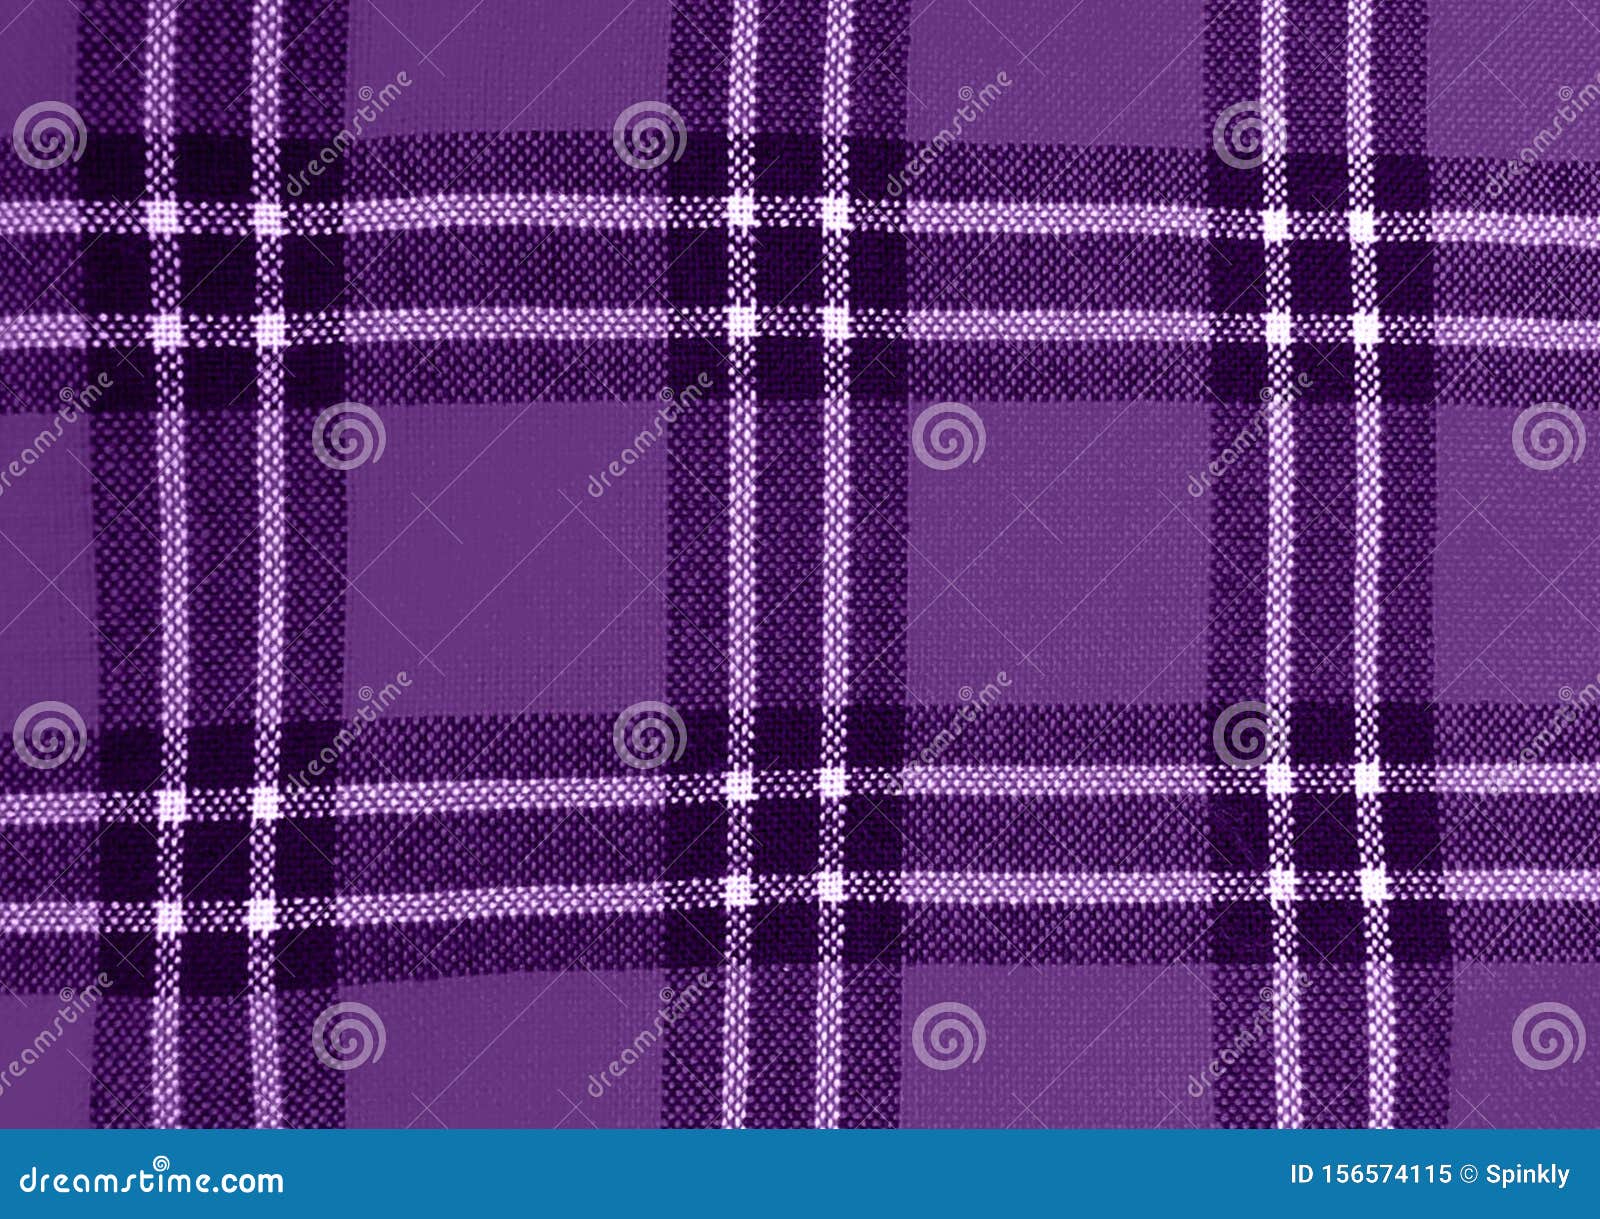 Cool Maasai Culture Pattern Material for Background Stock Image